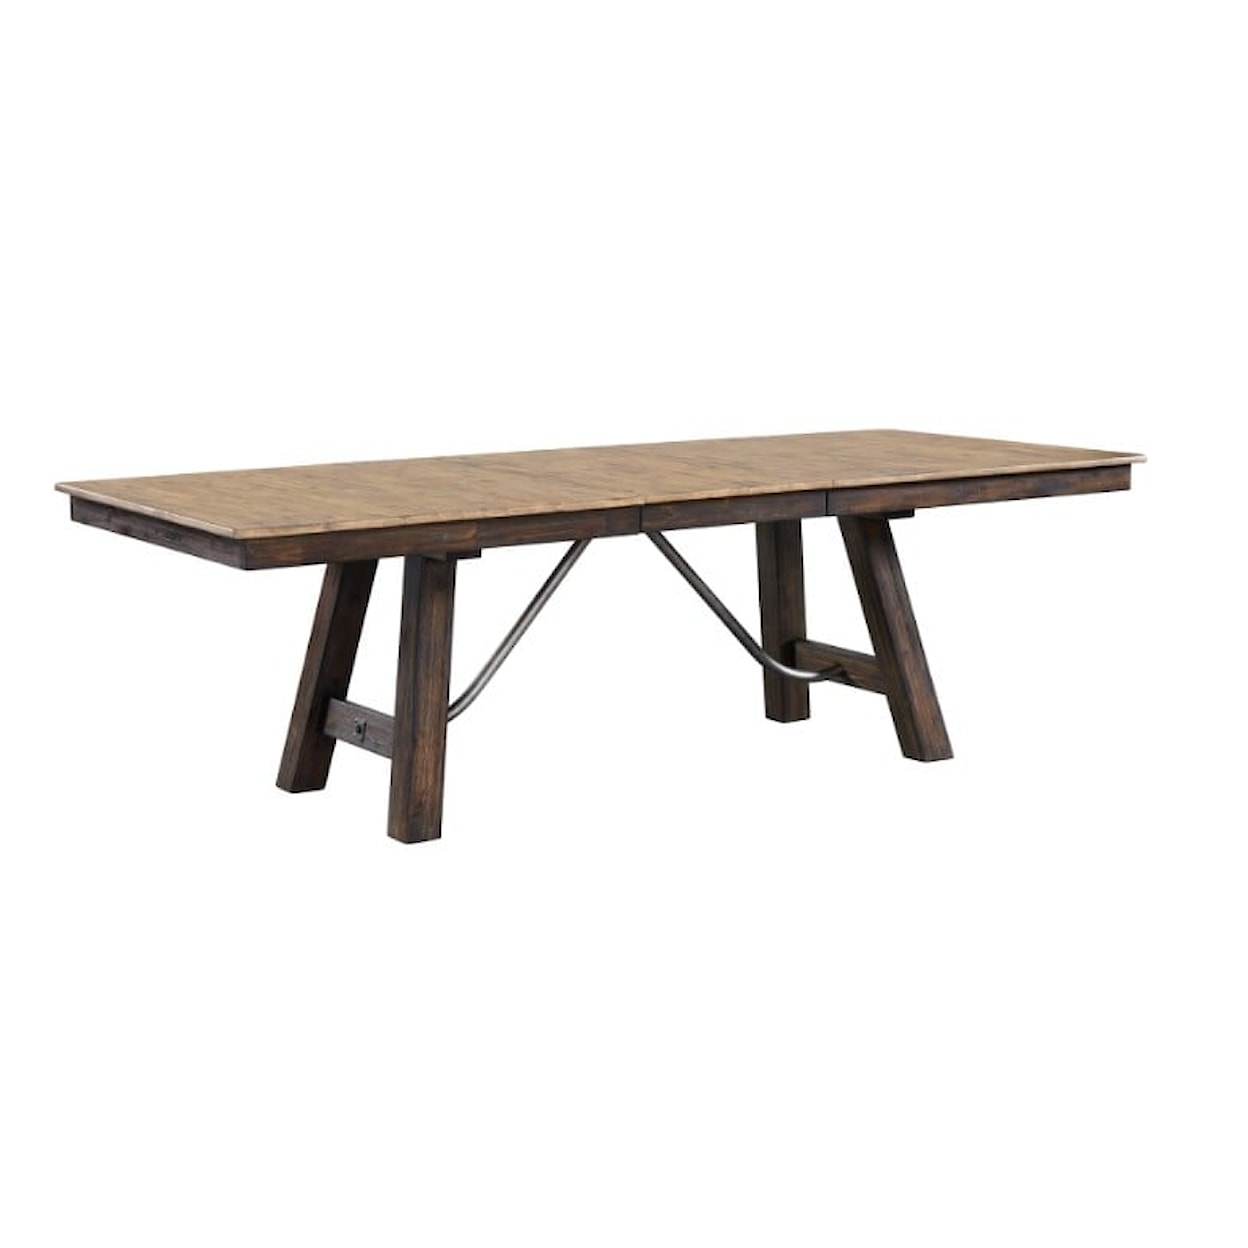 Intercon Transitions Dining Trestle Dining Table